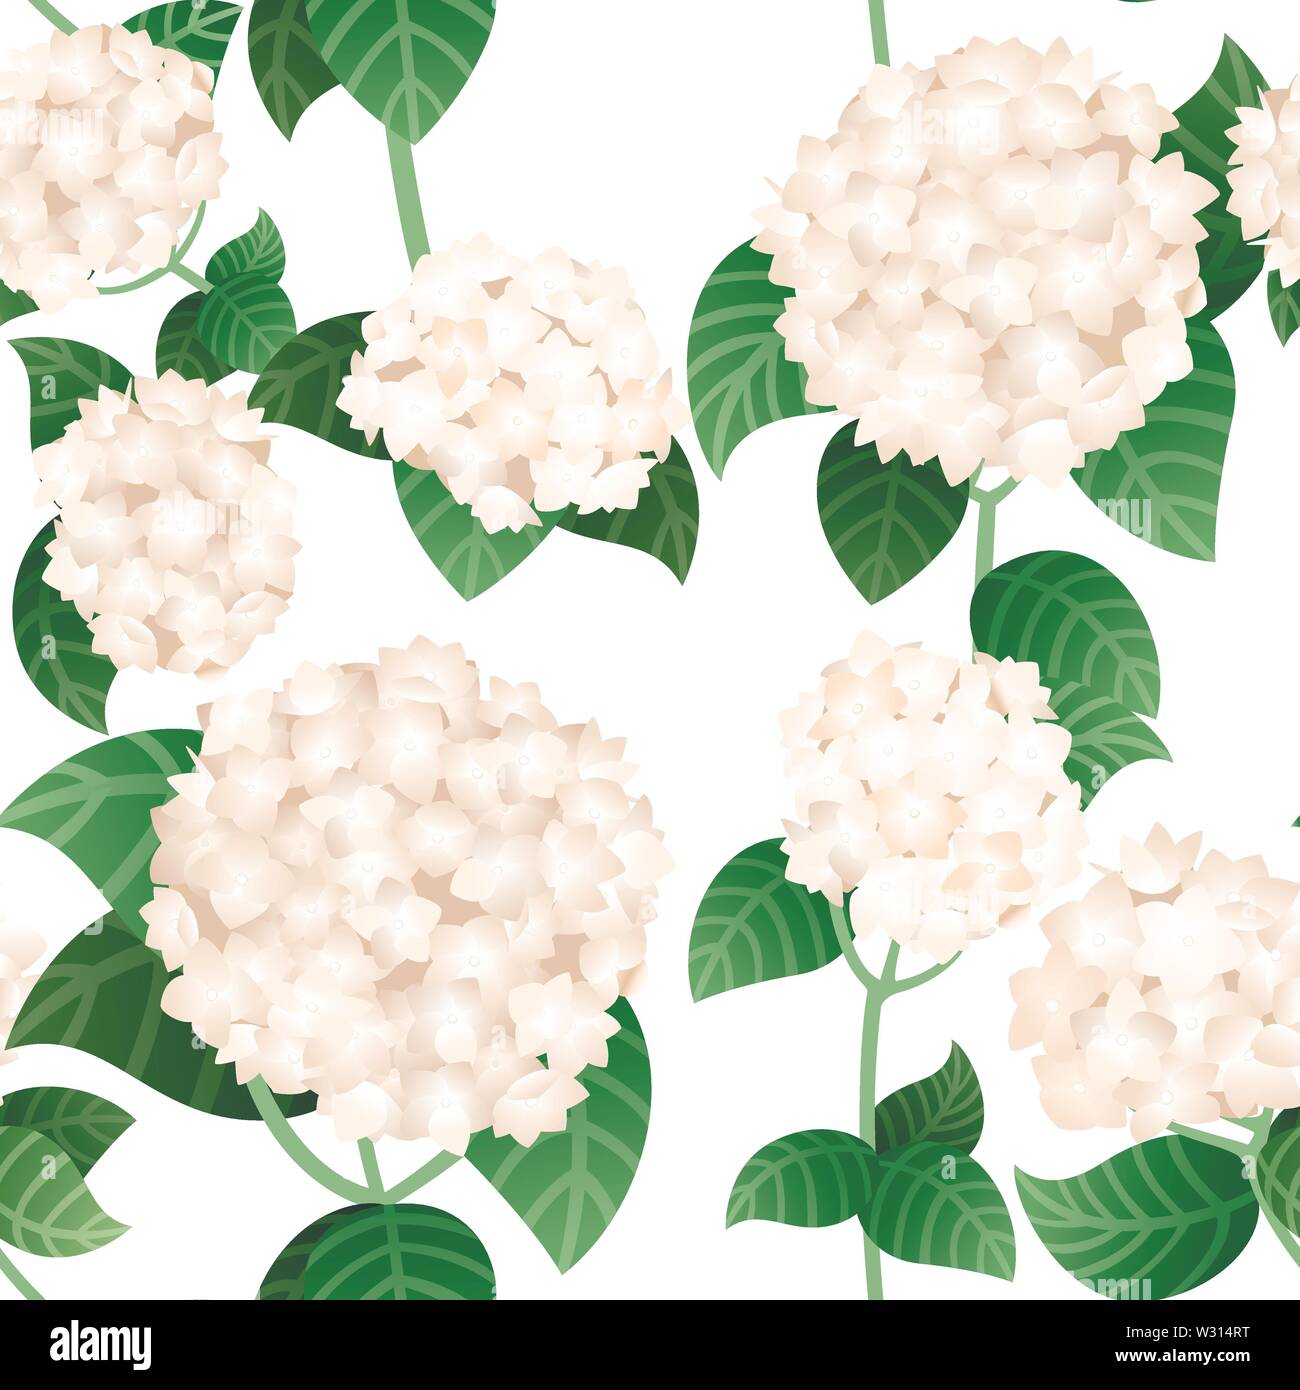 Seamless pattern of white hydrangea flowers with green stems and leaves flat vector illustration on white background. Stock Vector